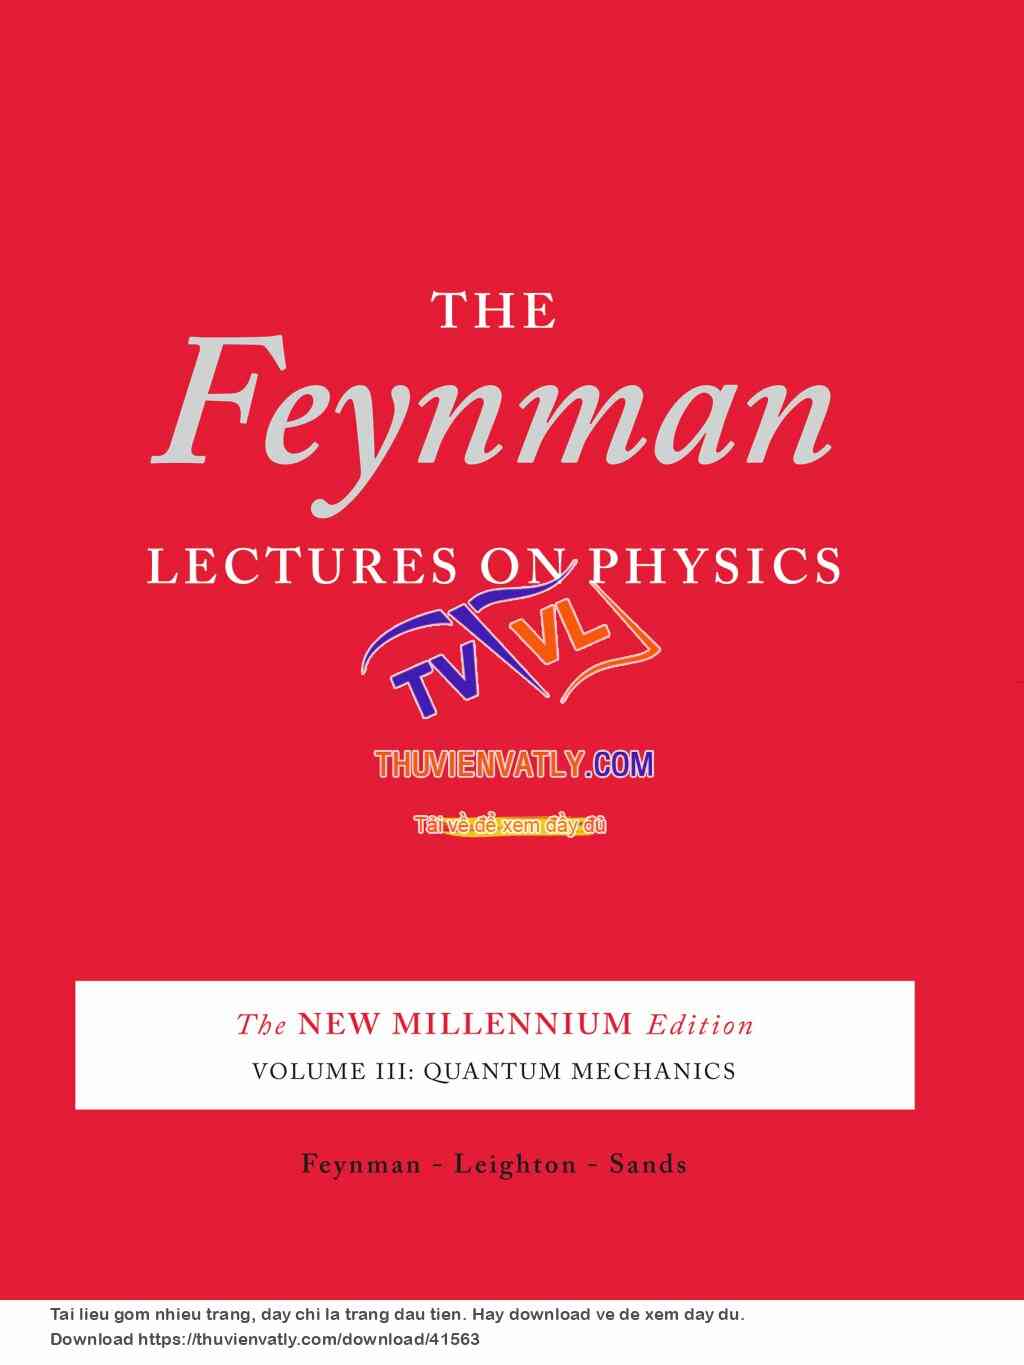 The Feynman Lectures on Physics III - The New Millennium Edition